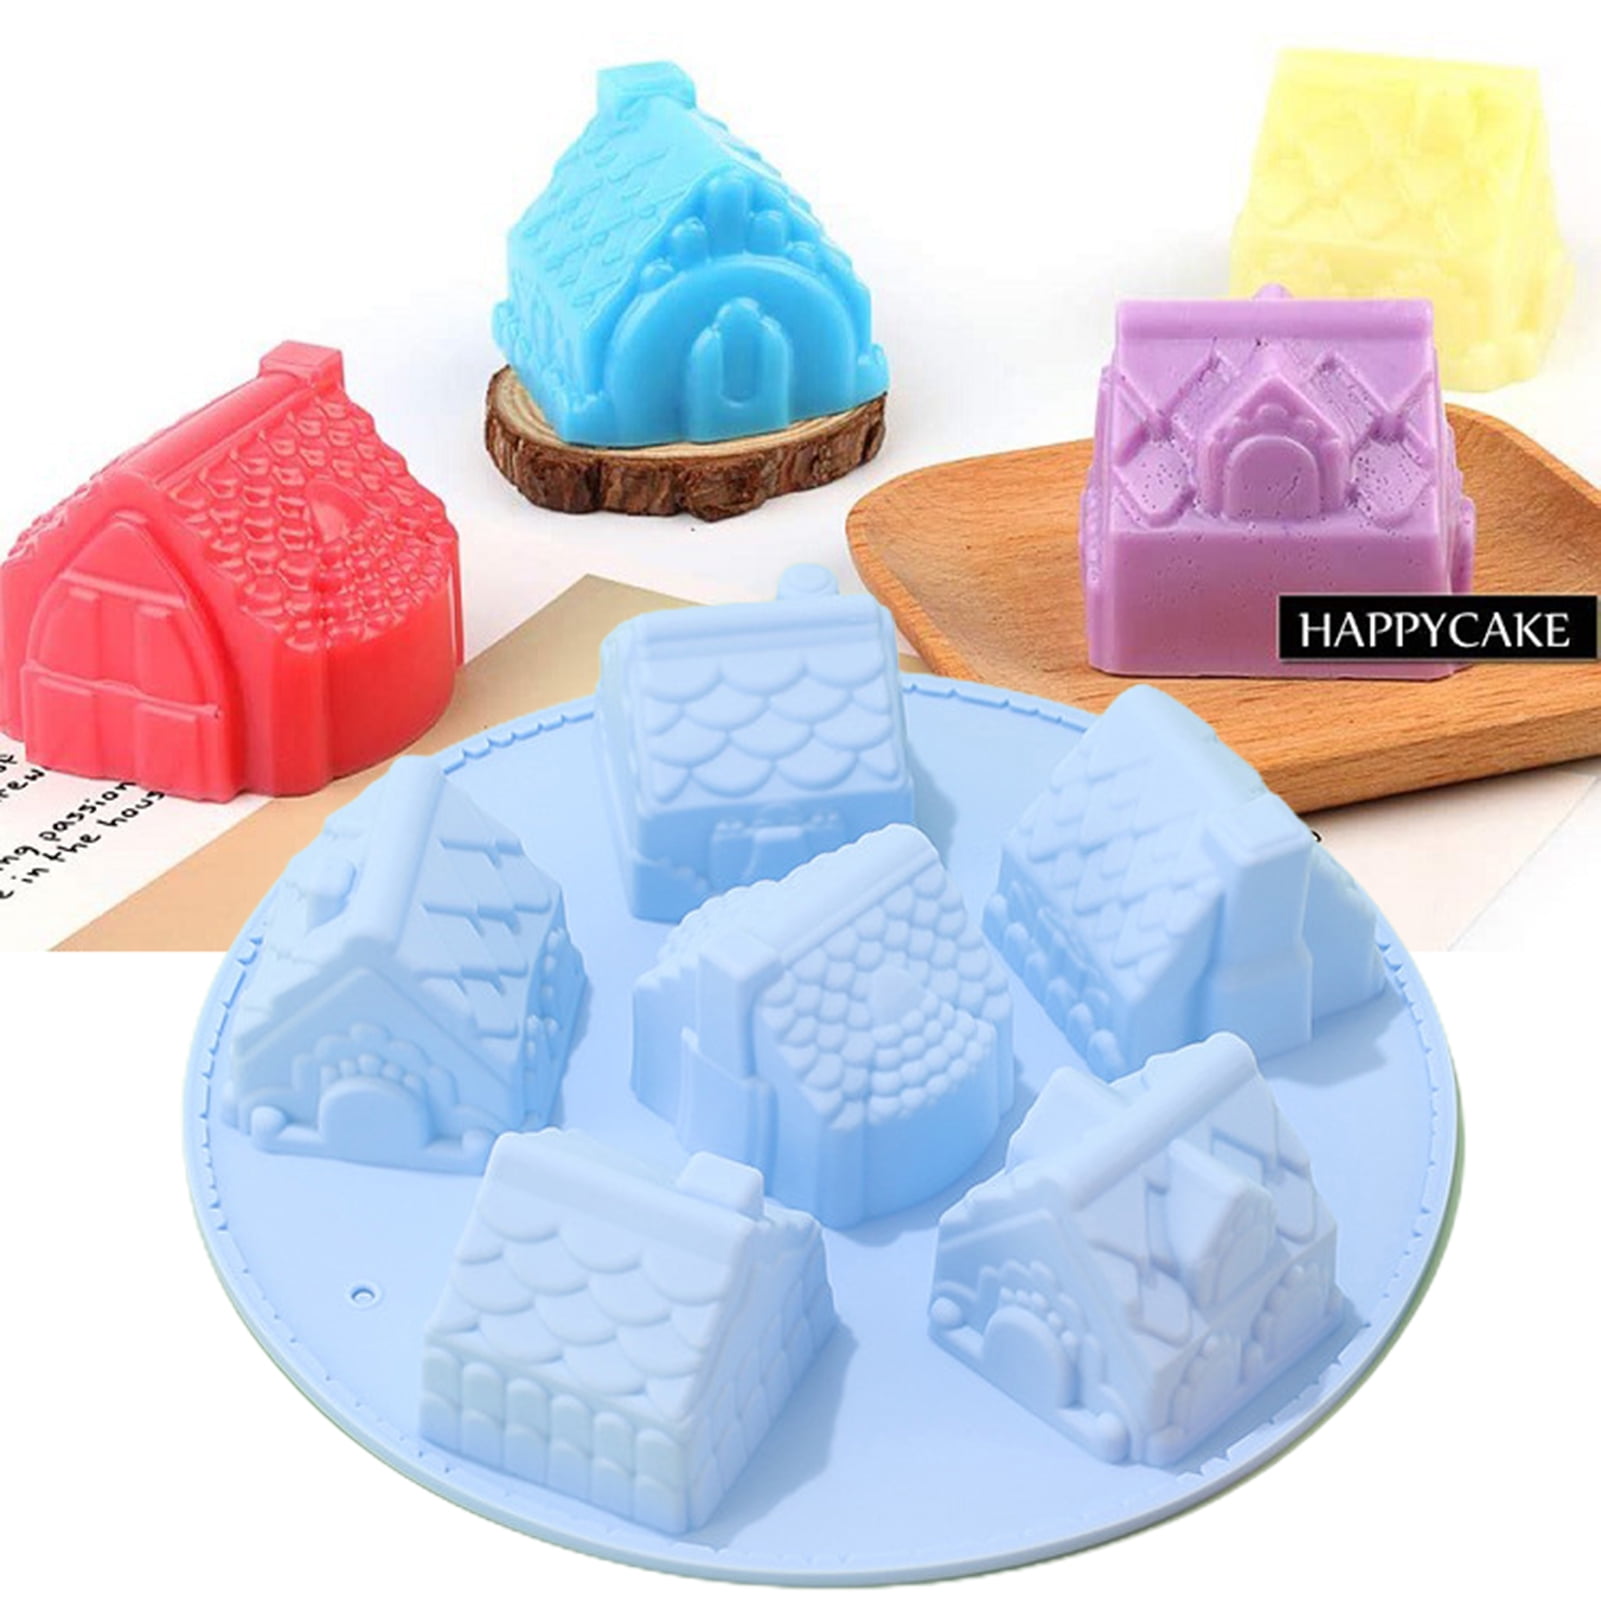 House Shape Silicone Mold, 6 Cavity Non-Stick Cozy Village Baking Pan, House Shape Soap Mold, Mini Christmas House Cake Molds for Brownies Chocolate